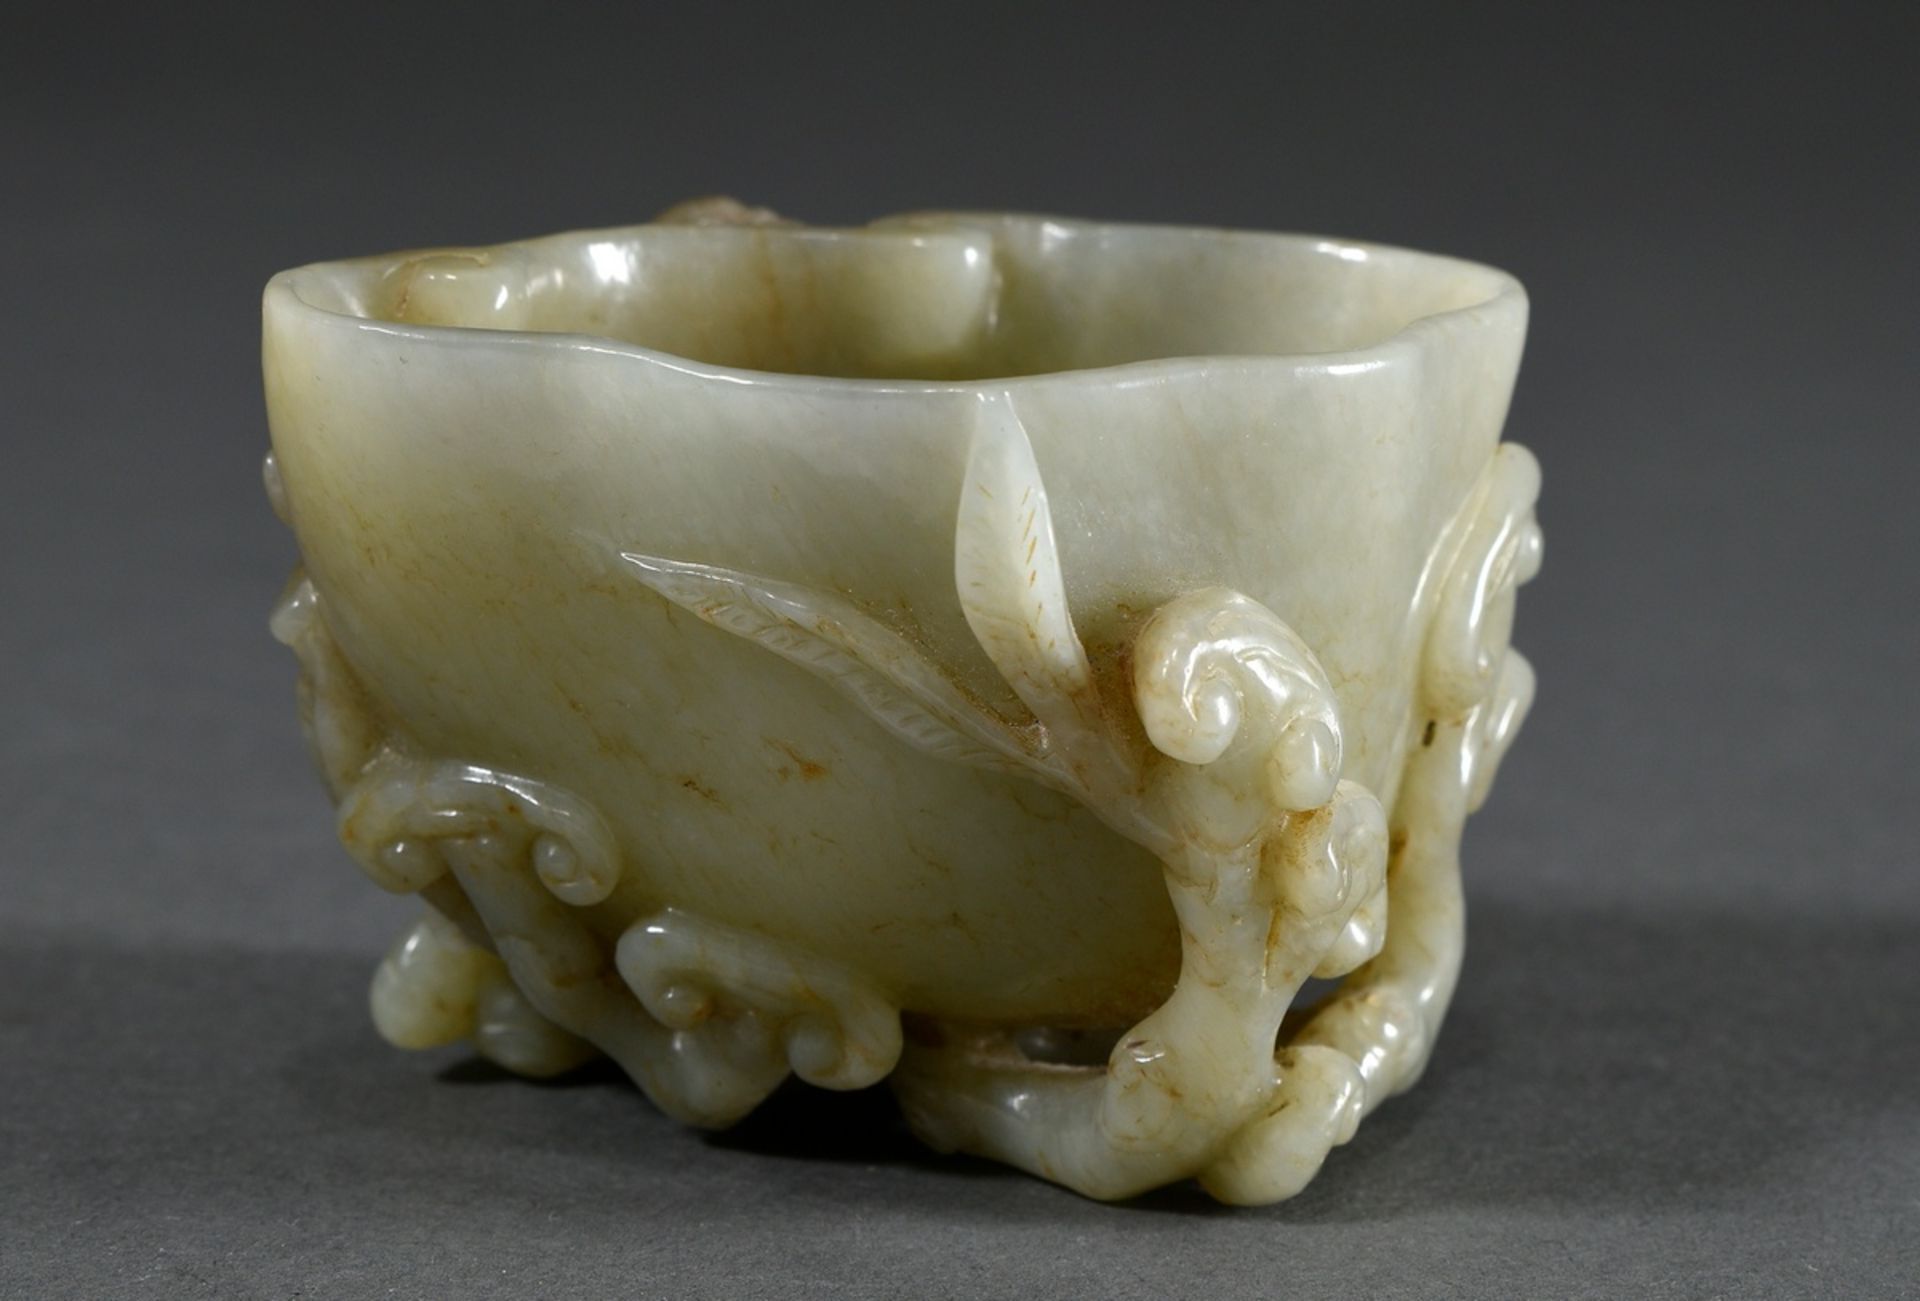 Detailed celadon jade cup "Boy with giant peach and lingzhi mushrooms", China probably Qing Dynasty - Image 2 of 5